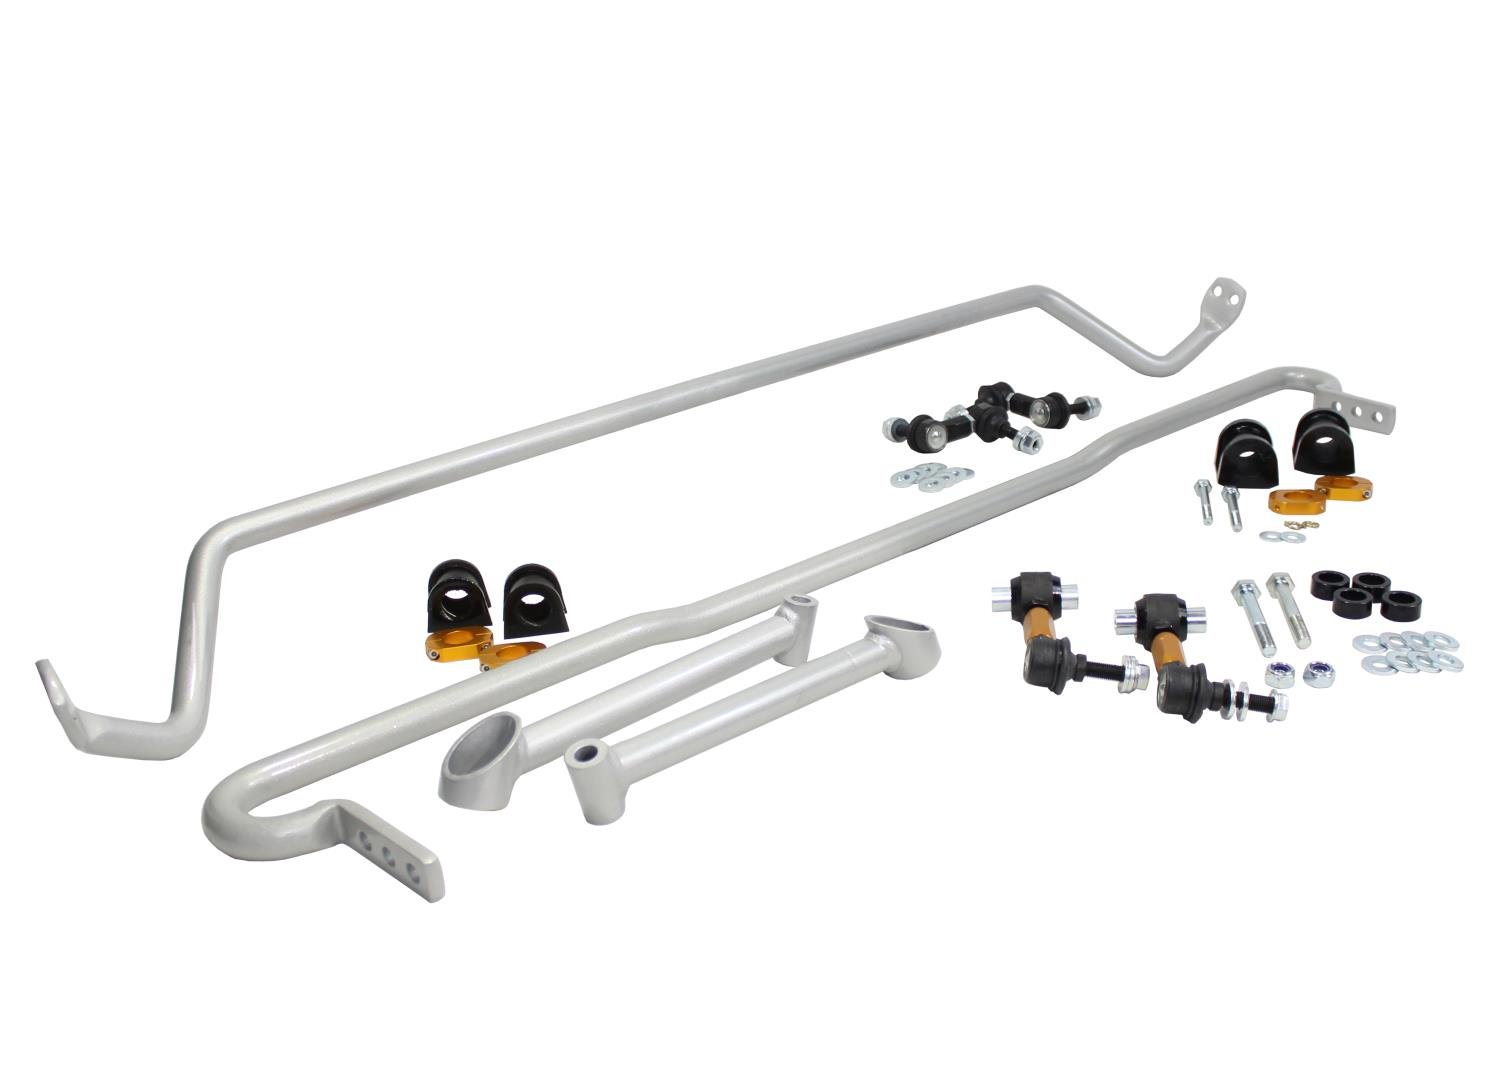 BSK012 Front And Rear Sway Bar Kit for 2008-2014 Subaru WRX, 11-14 WRX